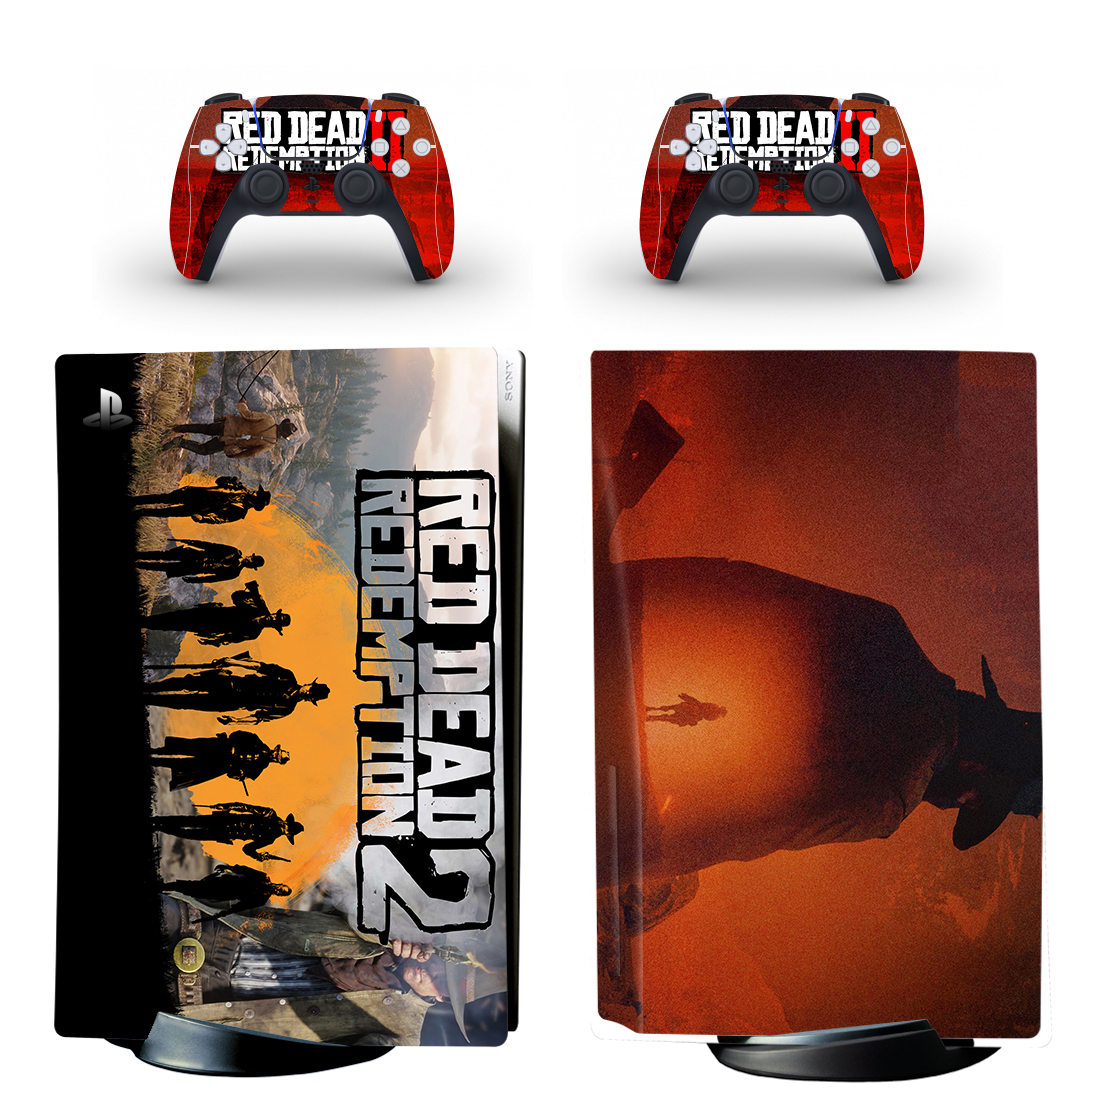 Red Dead Redemption 2 PS5 Skin Sticker And Controllers Design 1